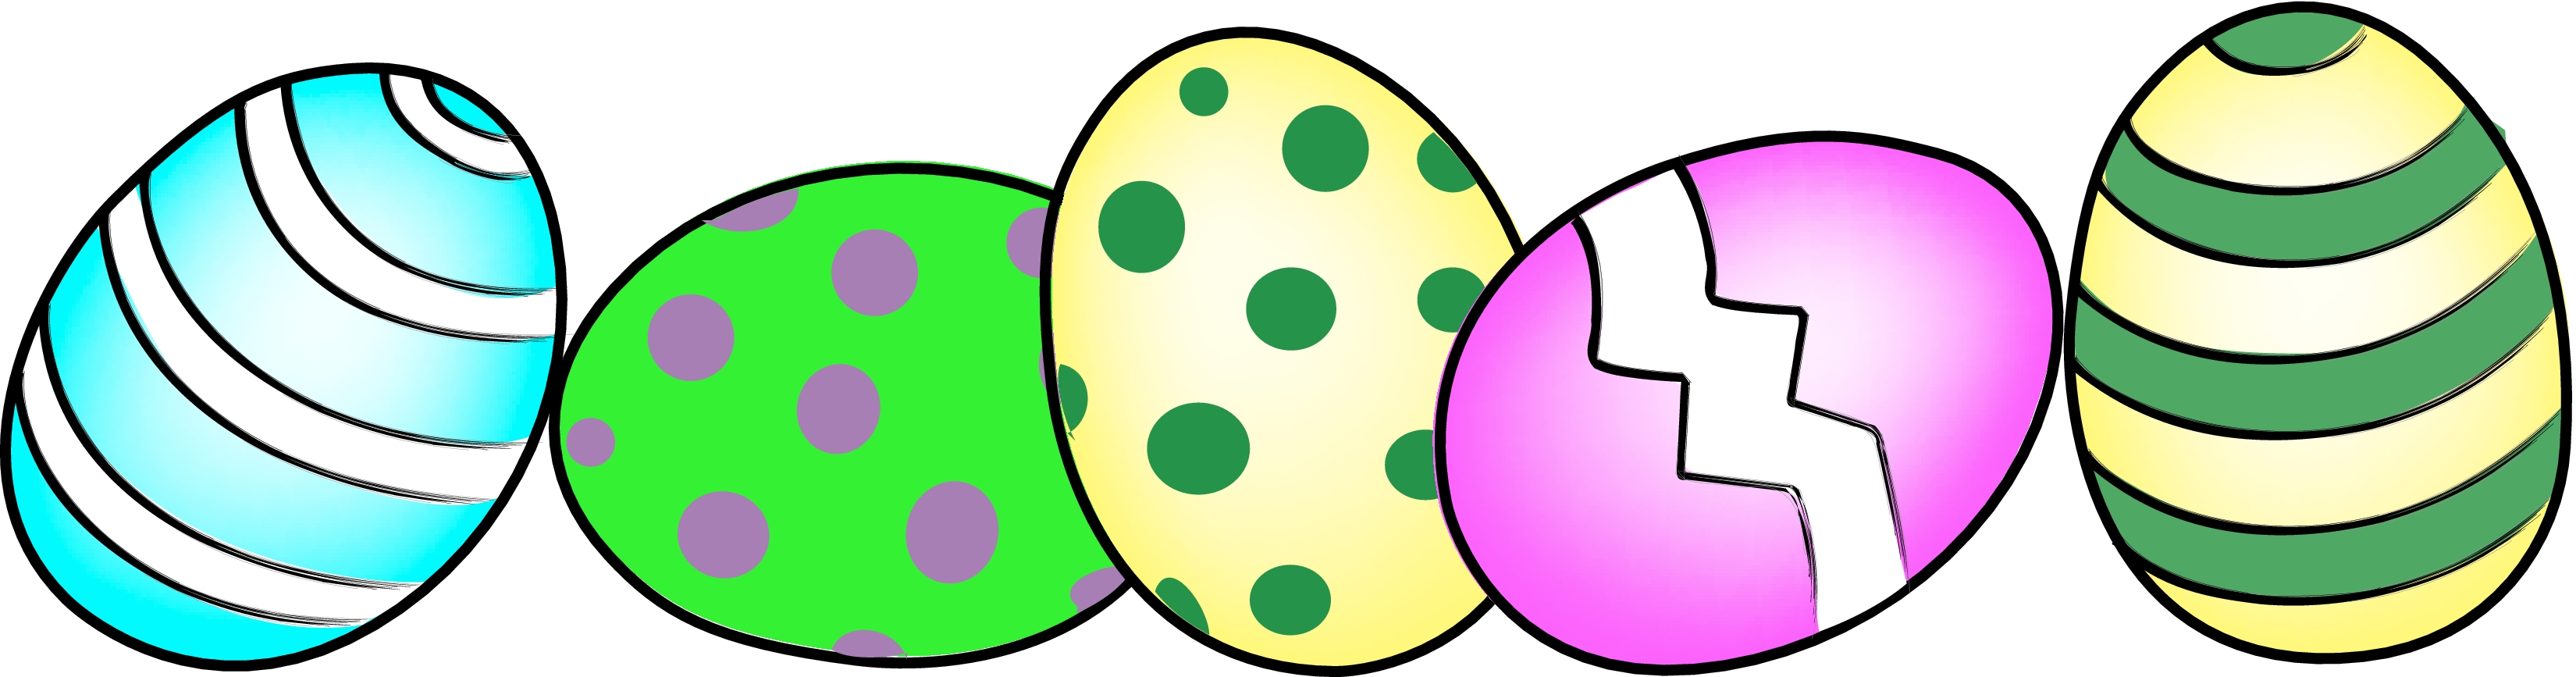 Easter egg clipart free clipart images 2